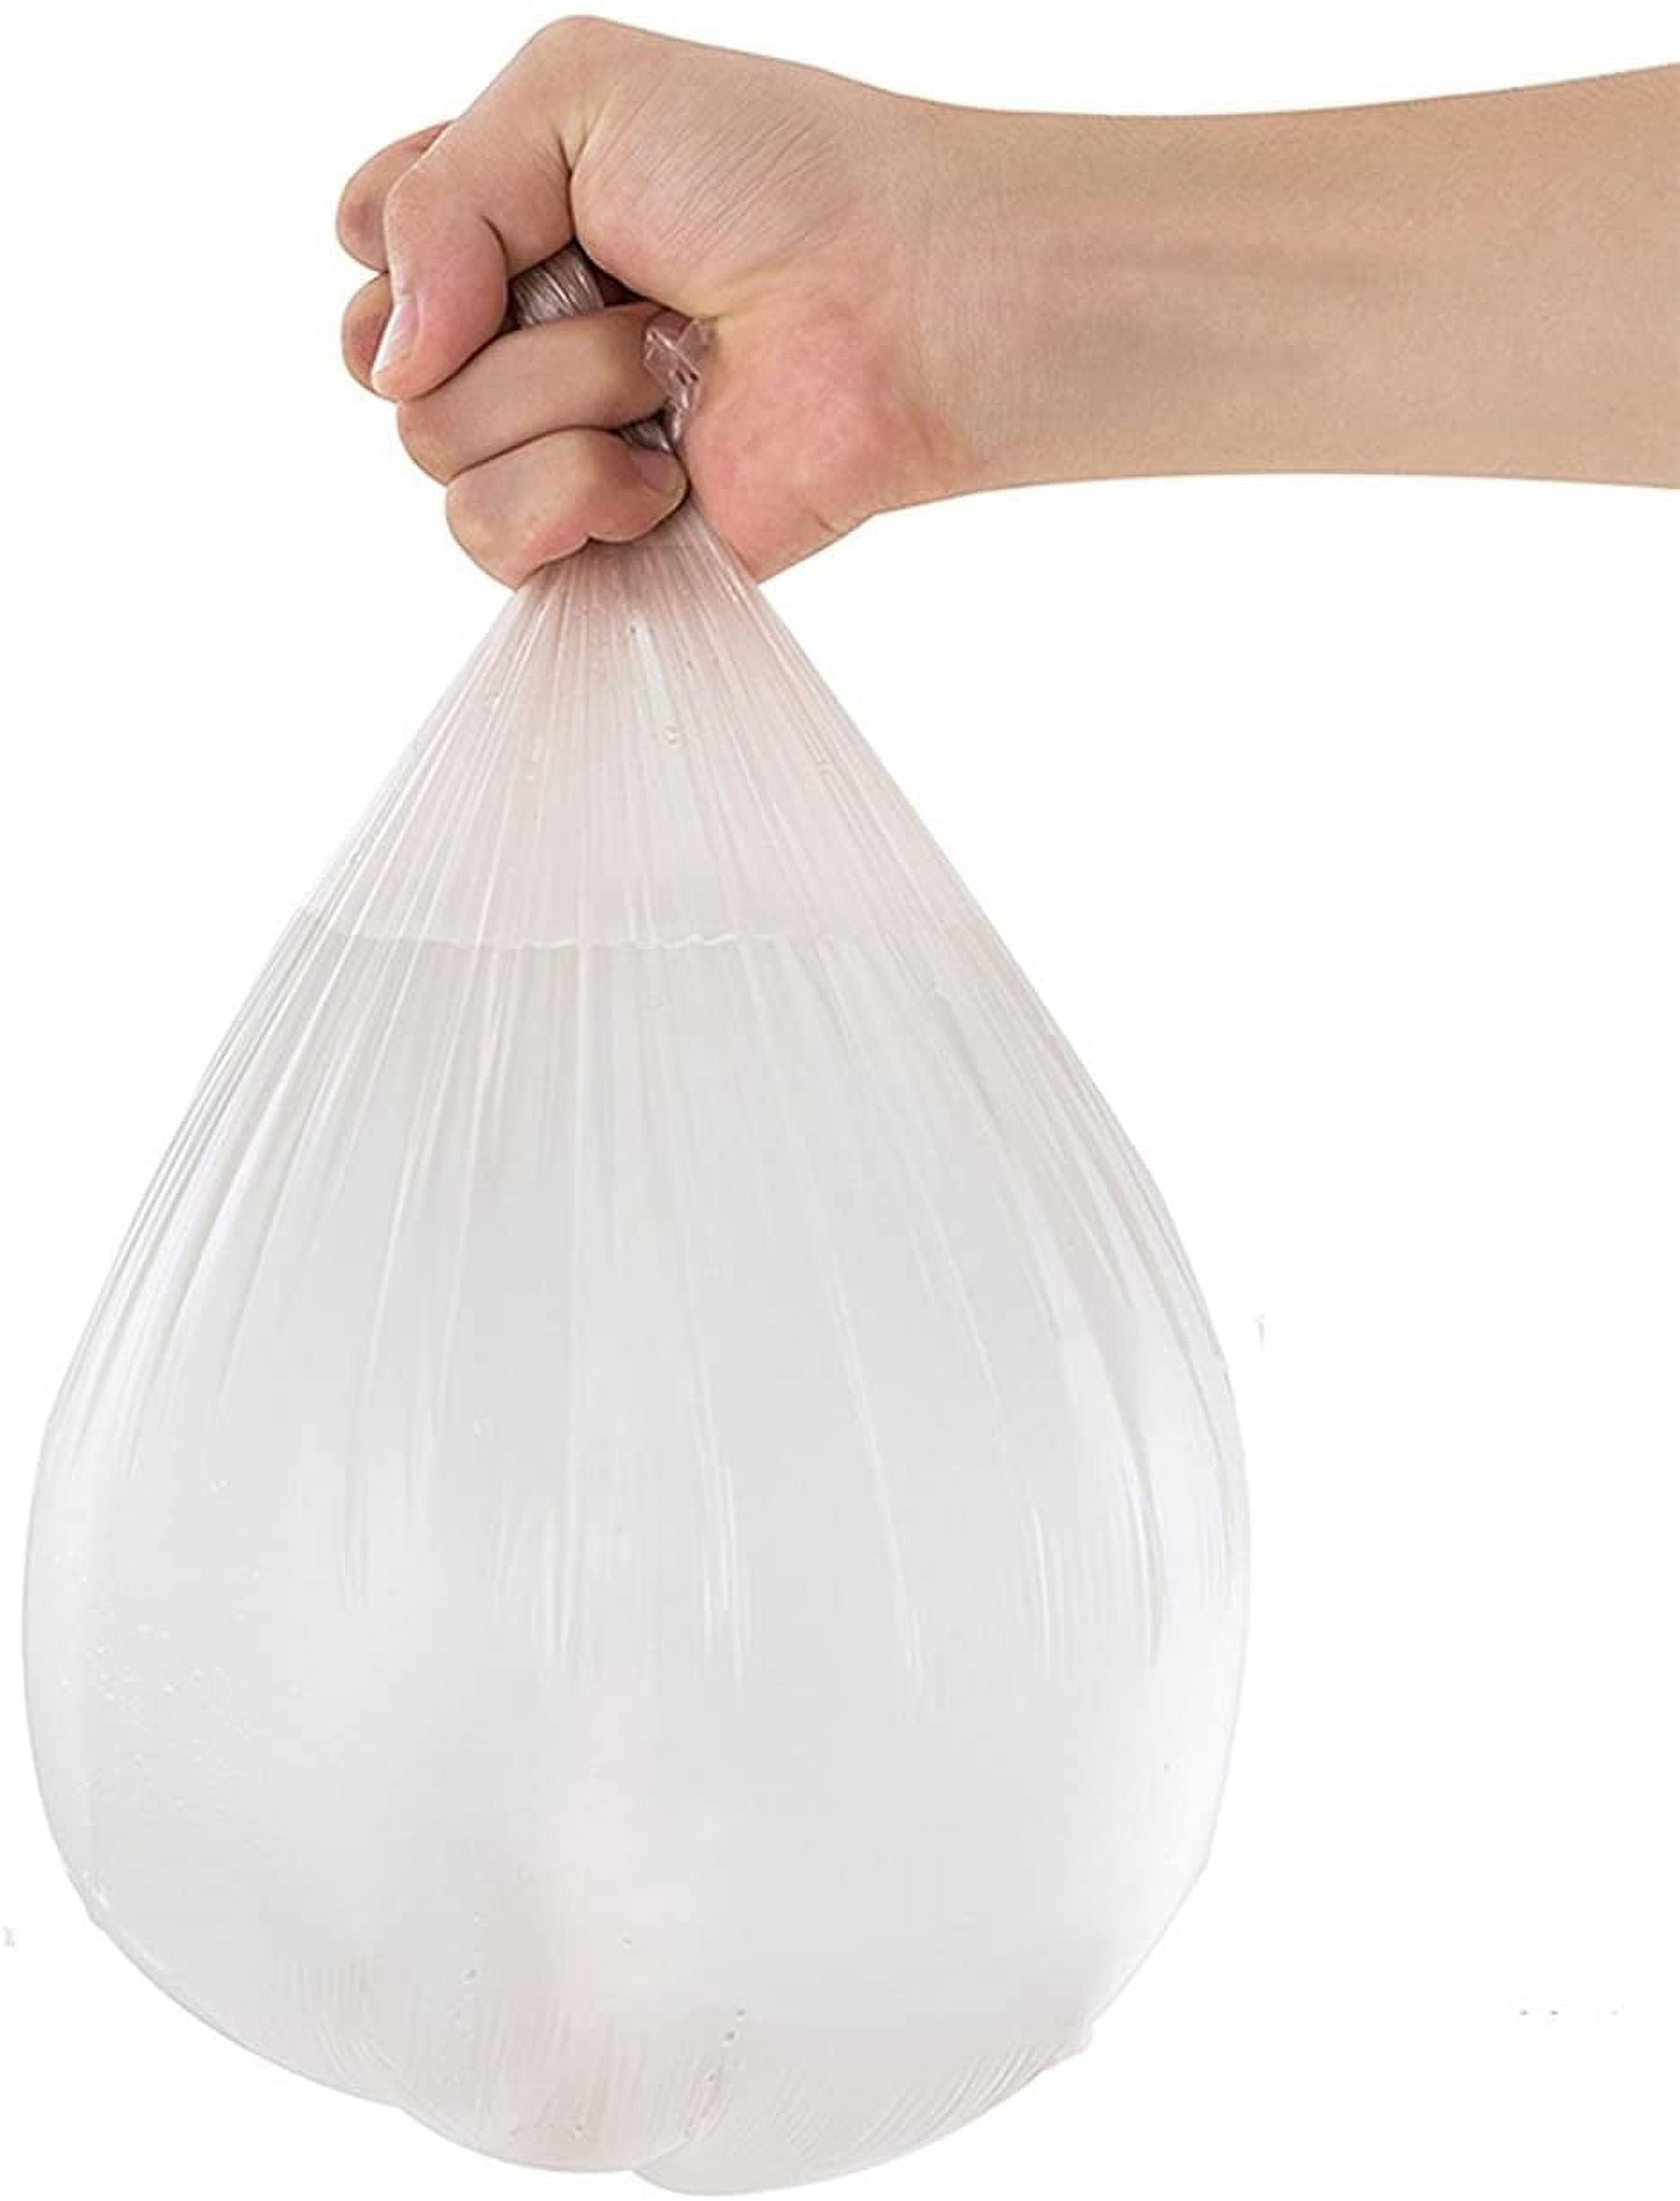 1.2 gallon trash can liners,Small clear Garbage Bags 300,Extra Strong 1 2  Gal Trash Bag,Fit 4.5-6 liters trash Bin Liners for Home Office Kitchen